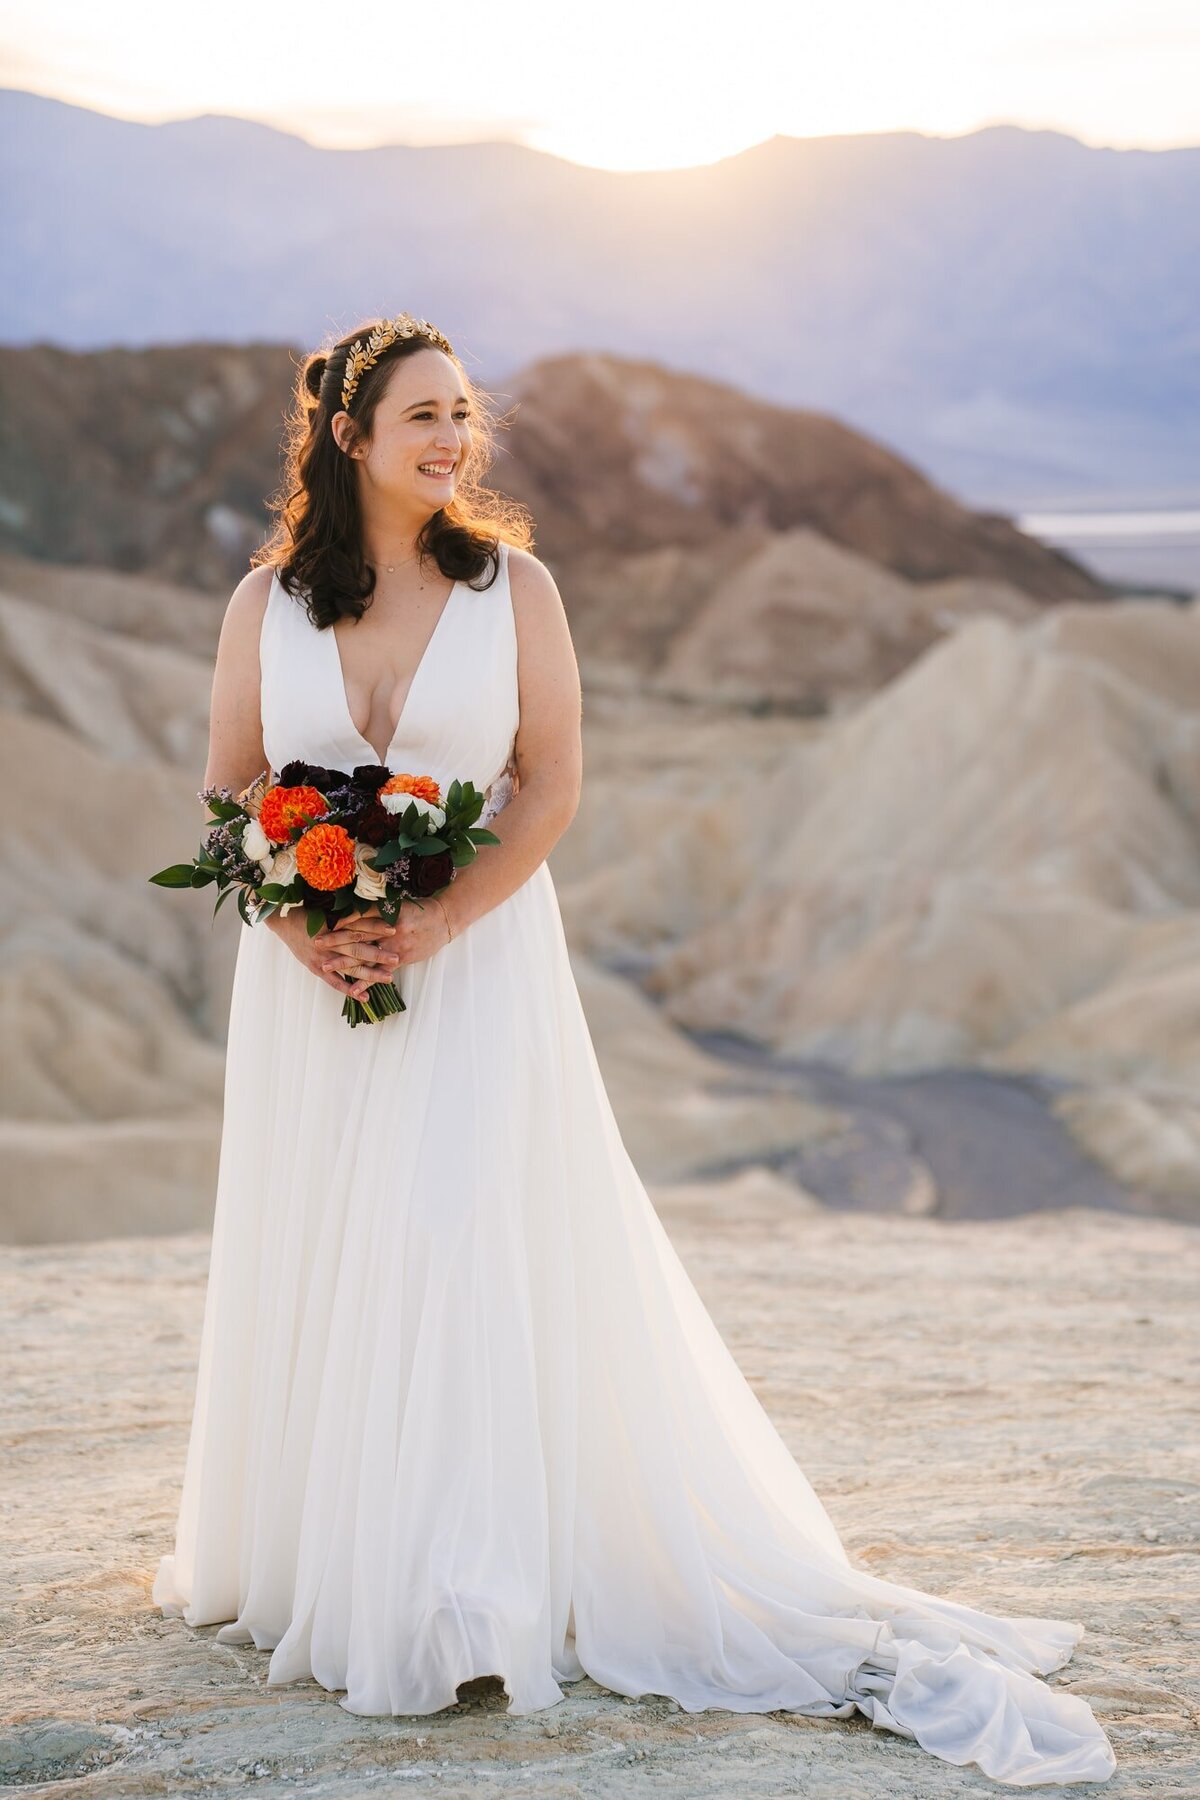 The beautiful bride at Zabriskie Point in Death Valley, gracing the scene in her gown and a radiant smile, holding a stunning bouquet of flowers.